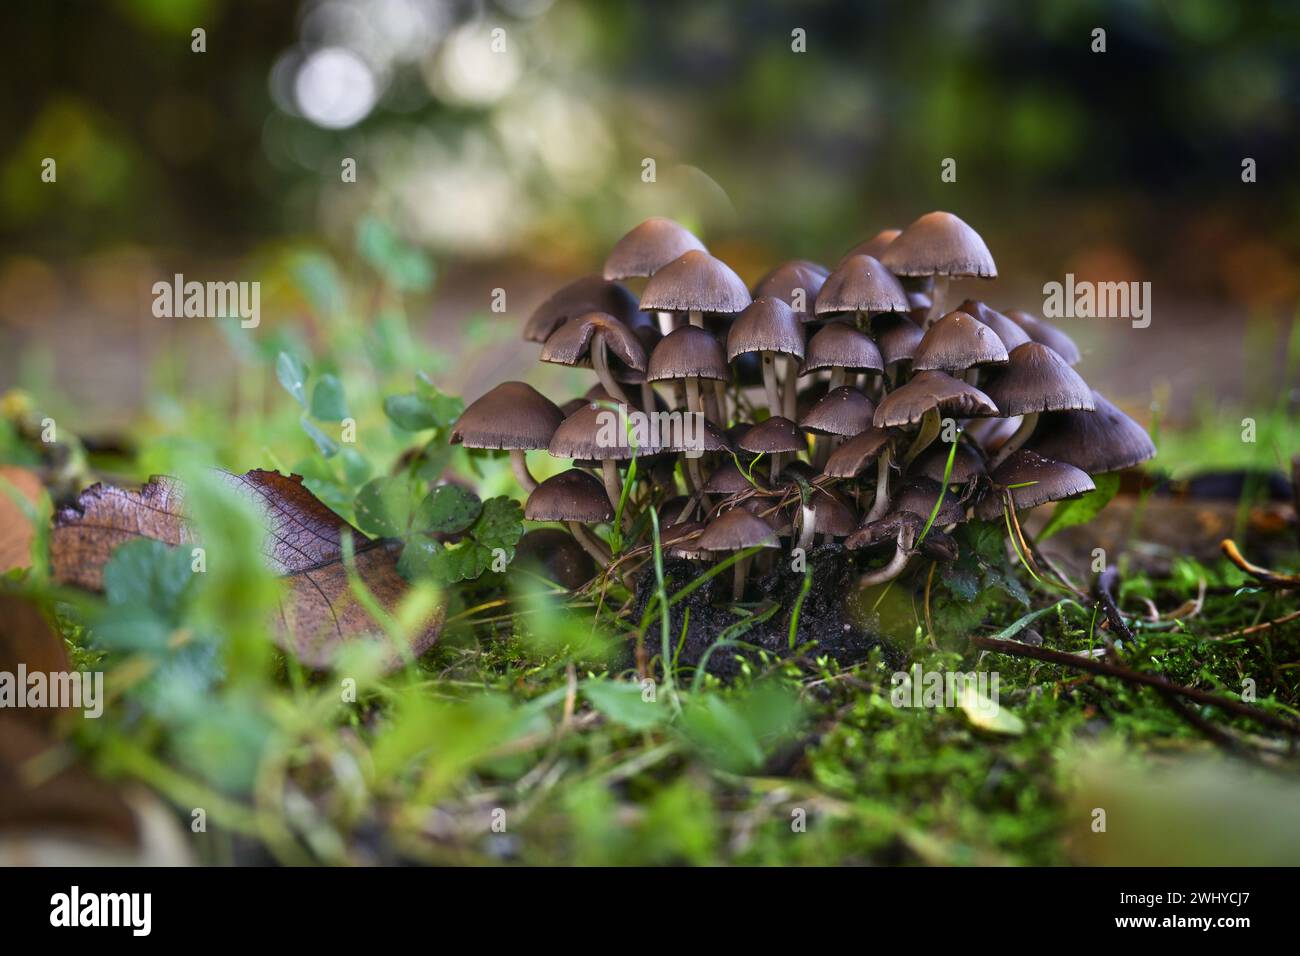 Group of mushrooms (probably Psathyrella pygmaea) with brown caps and thin white hollow stems in the moss under trees in a decid Stock Photo